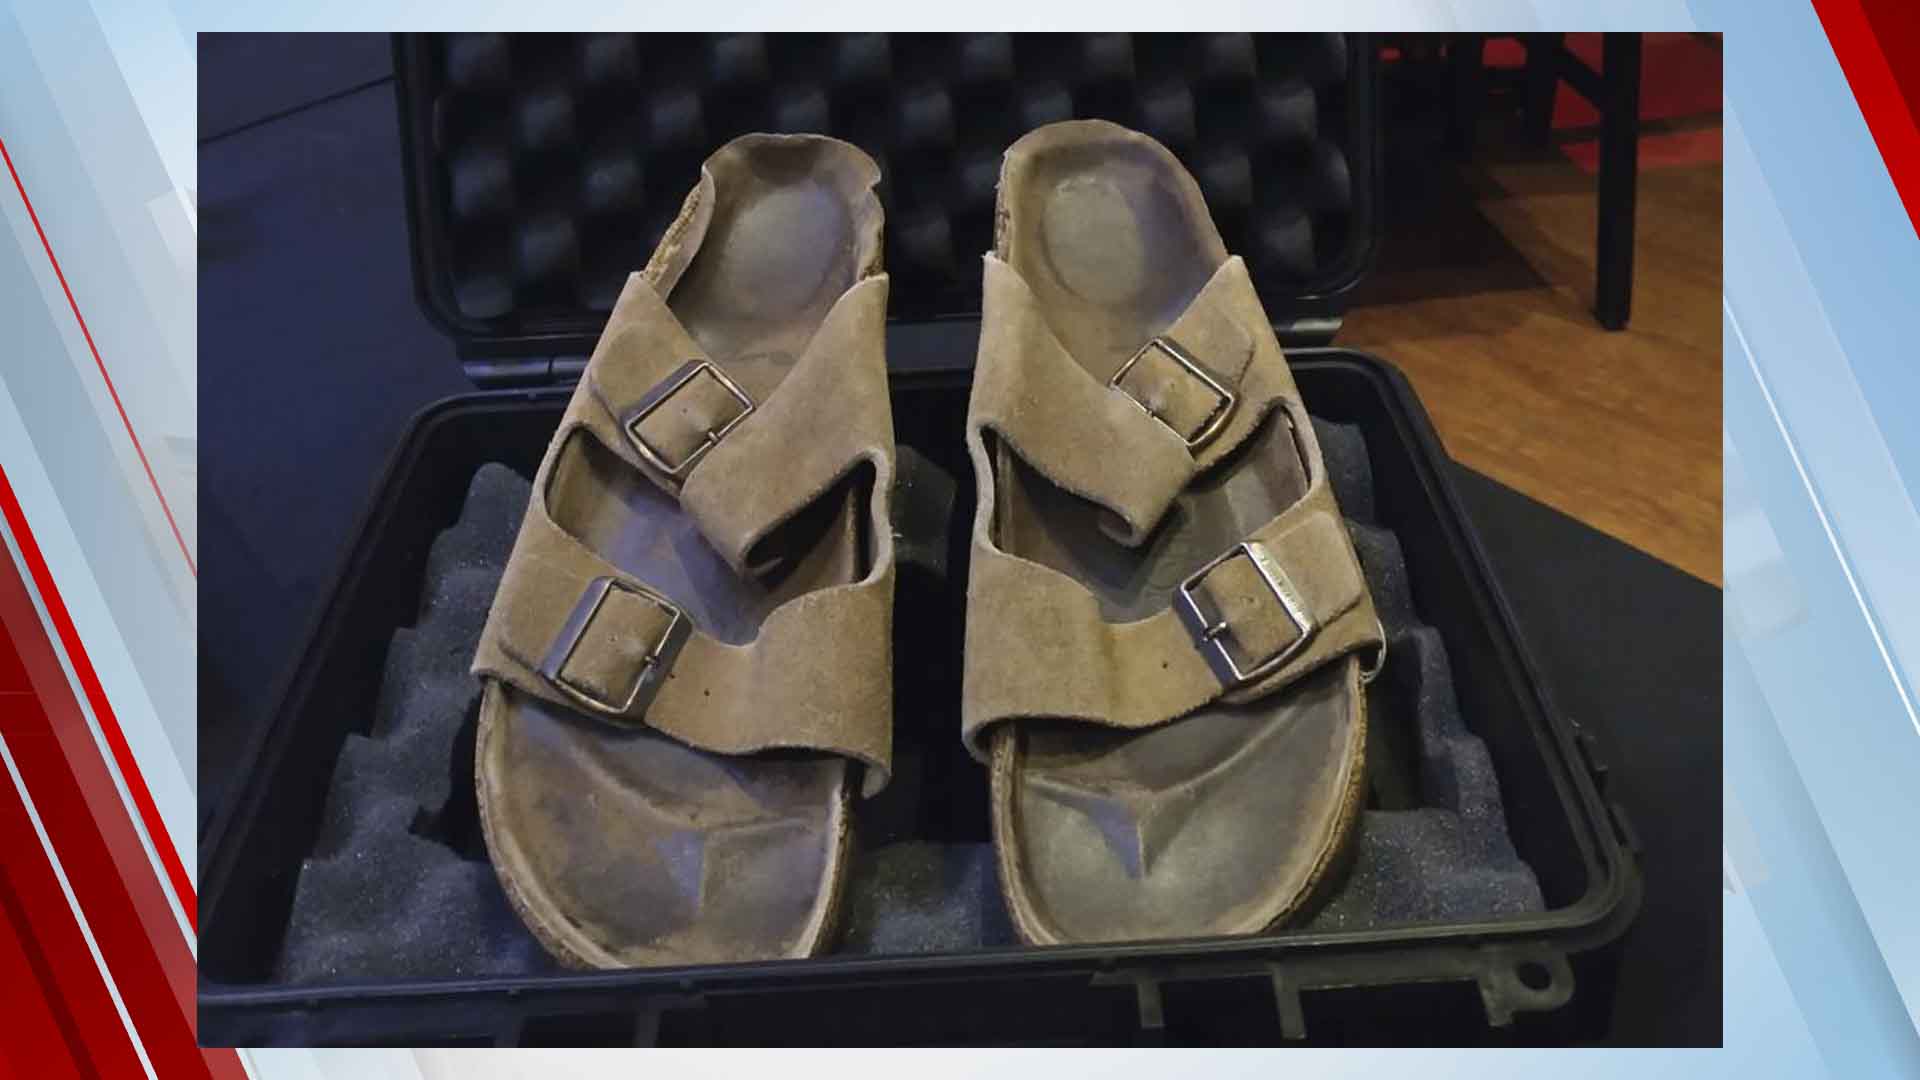 1970s Sandals Worn By Steve Jobs Auctioned For $218k